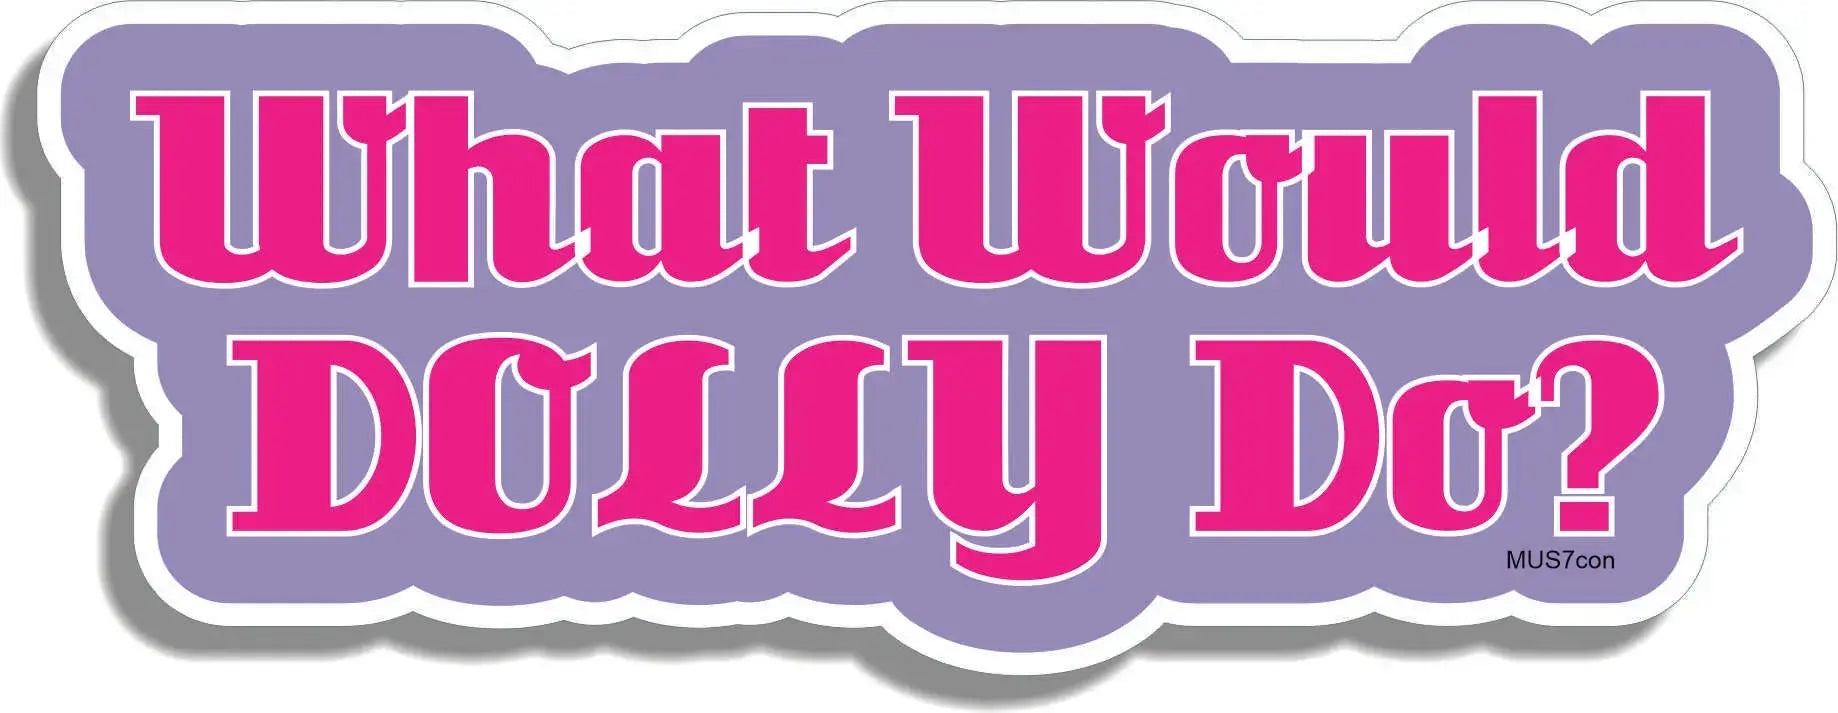 What Would Dolly Do? - Contoured Funny Car Sticker, Phone Stickers